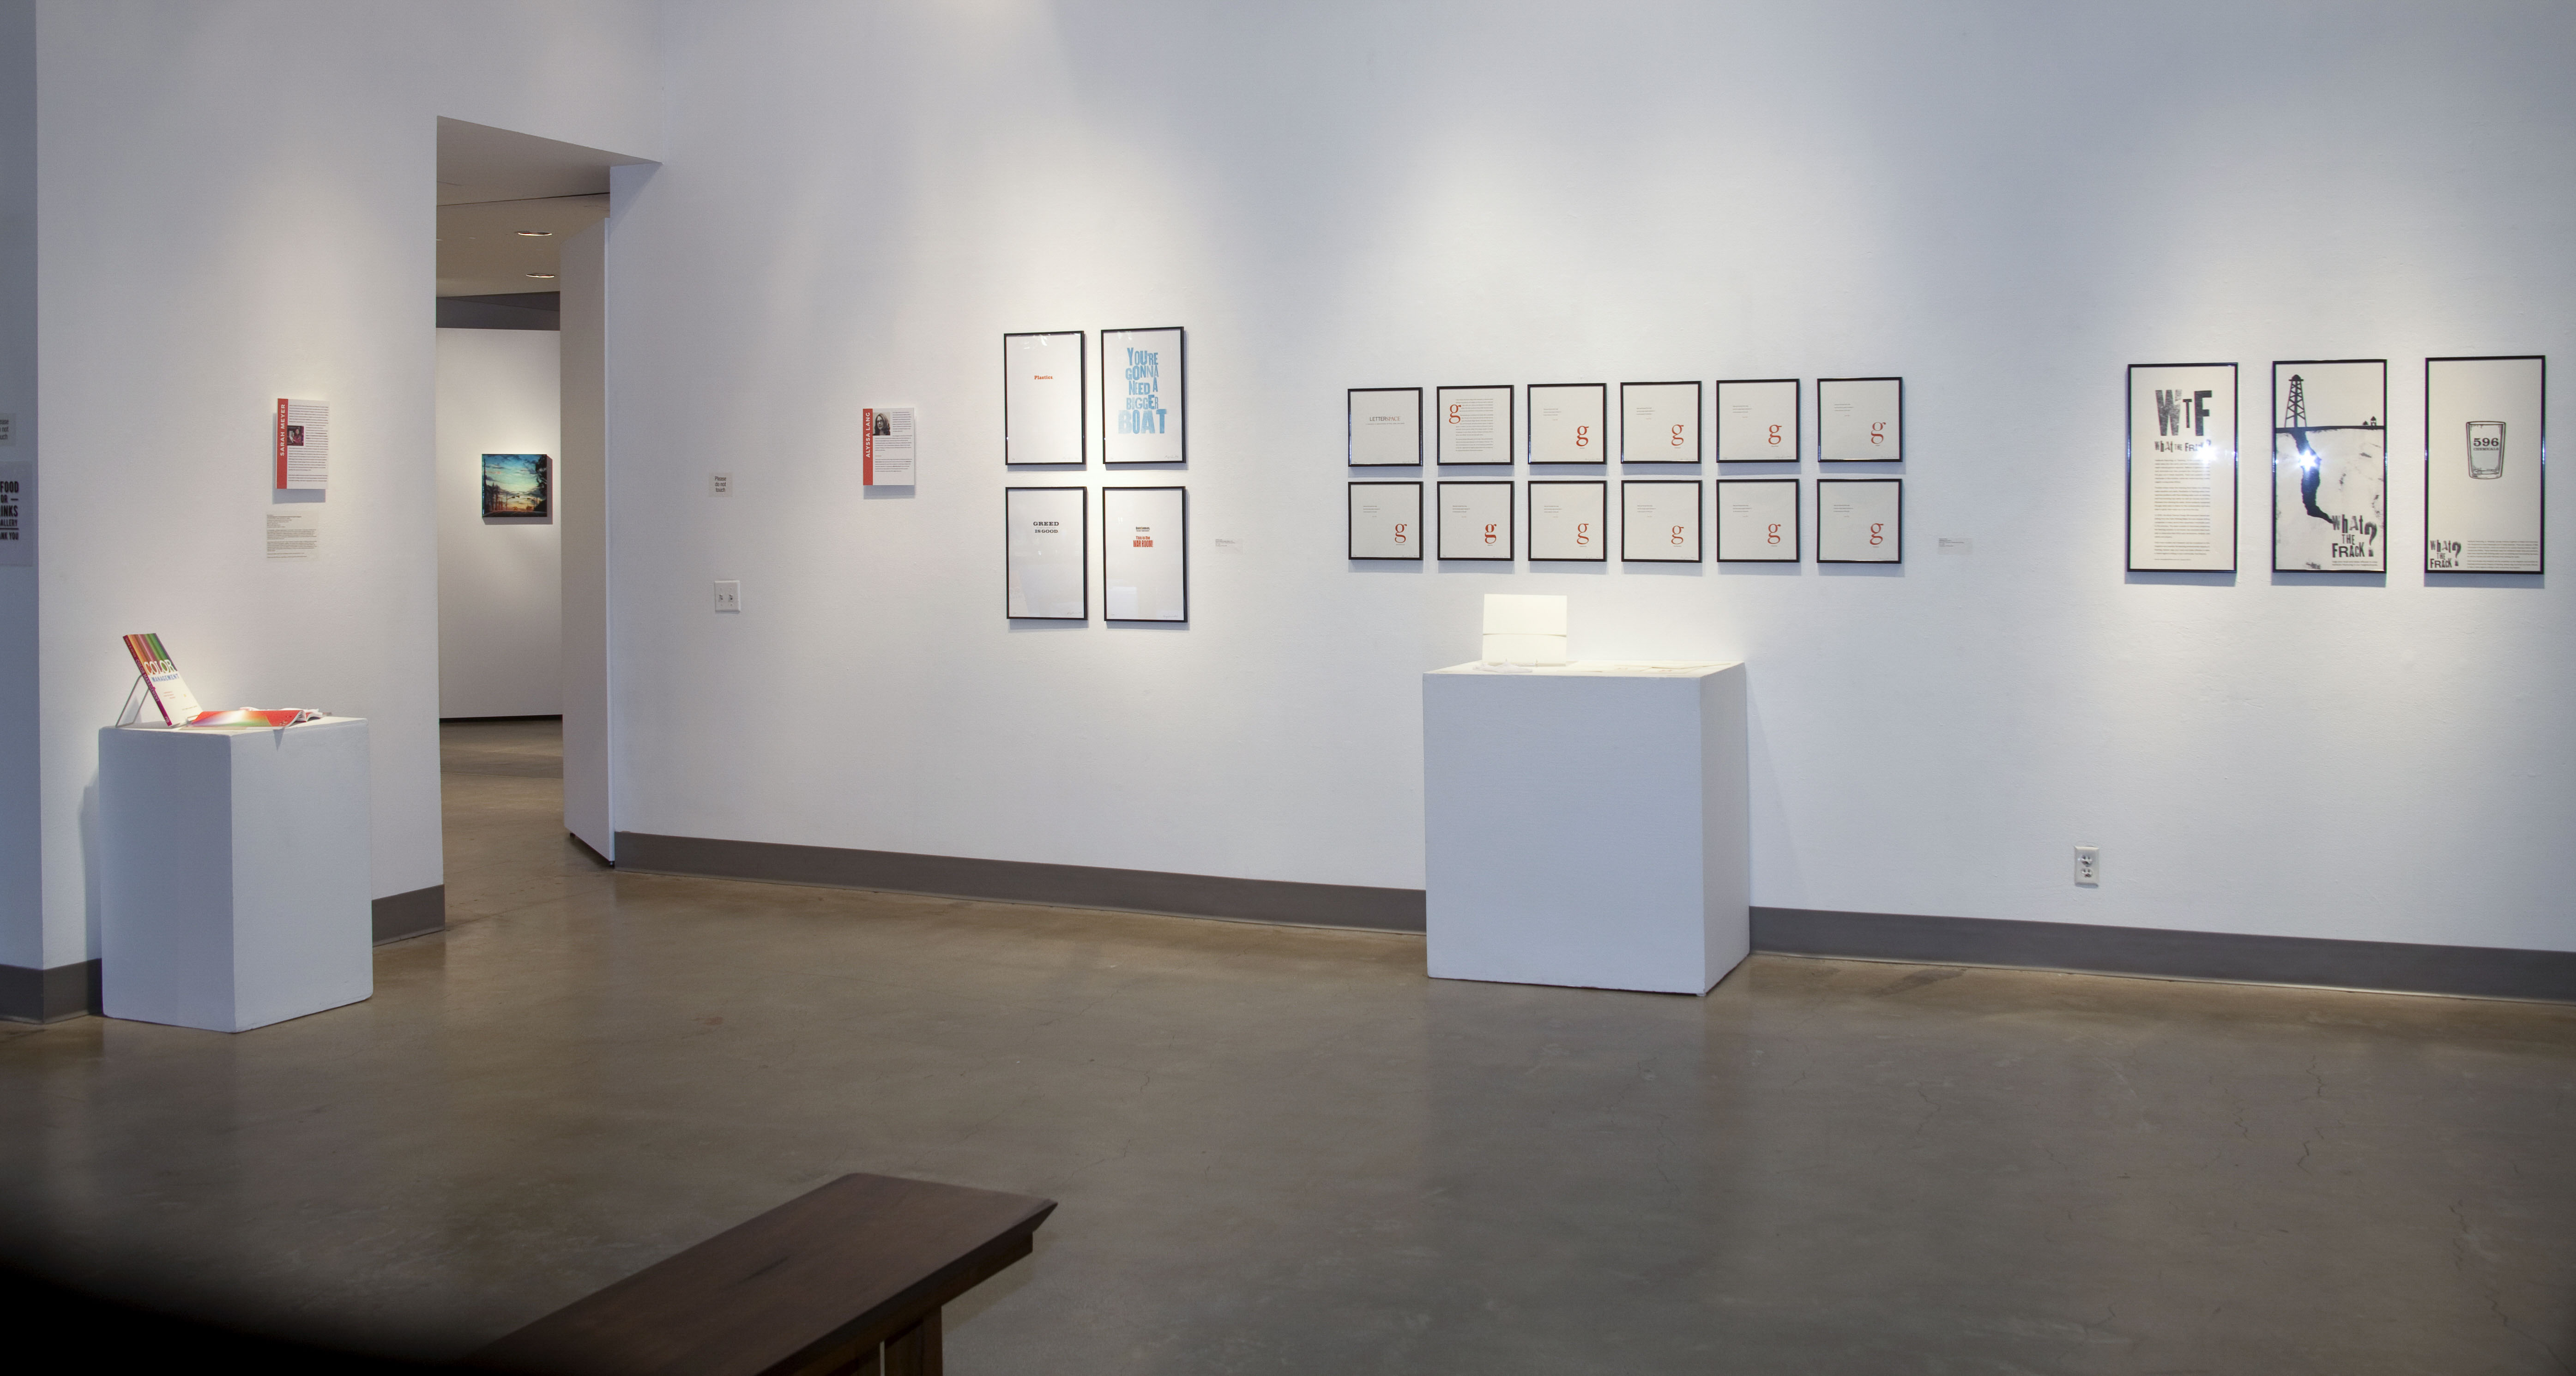 Installation View, Front West Gallery, Art Faculty Show 2014 Exhibition, Nov. 10, 2014 to Dec. 13, 2014.